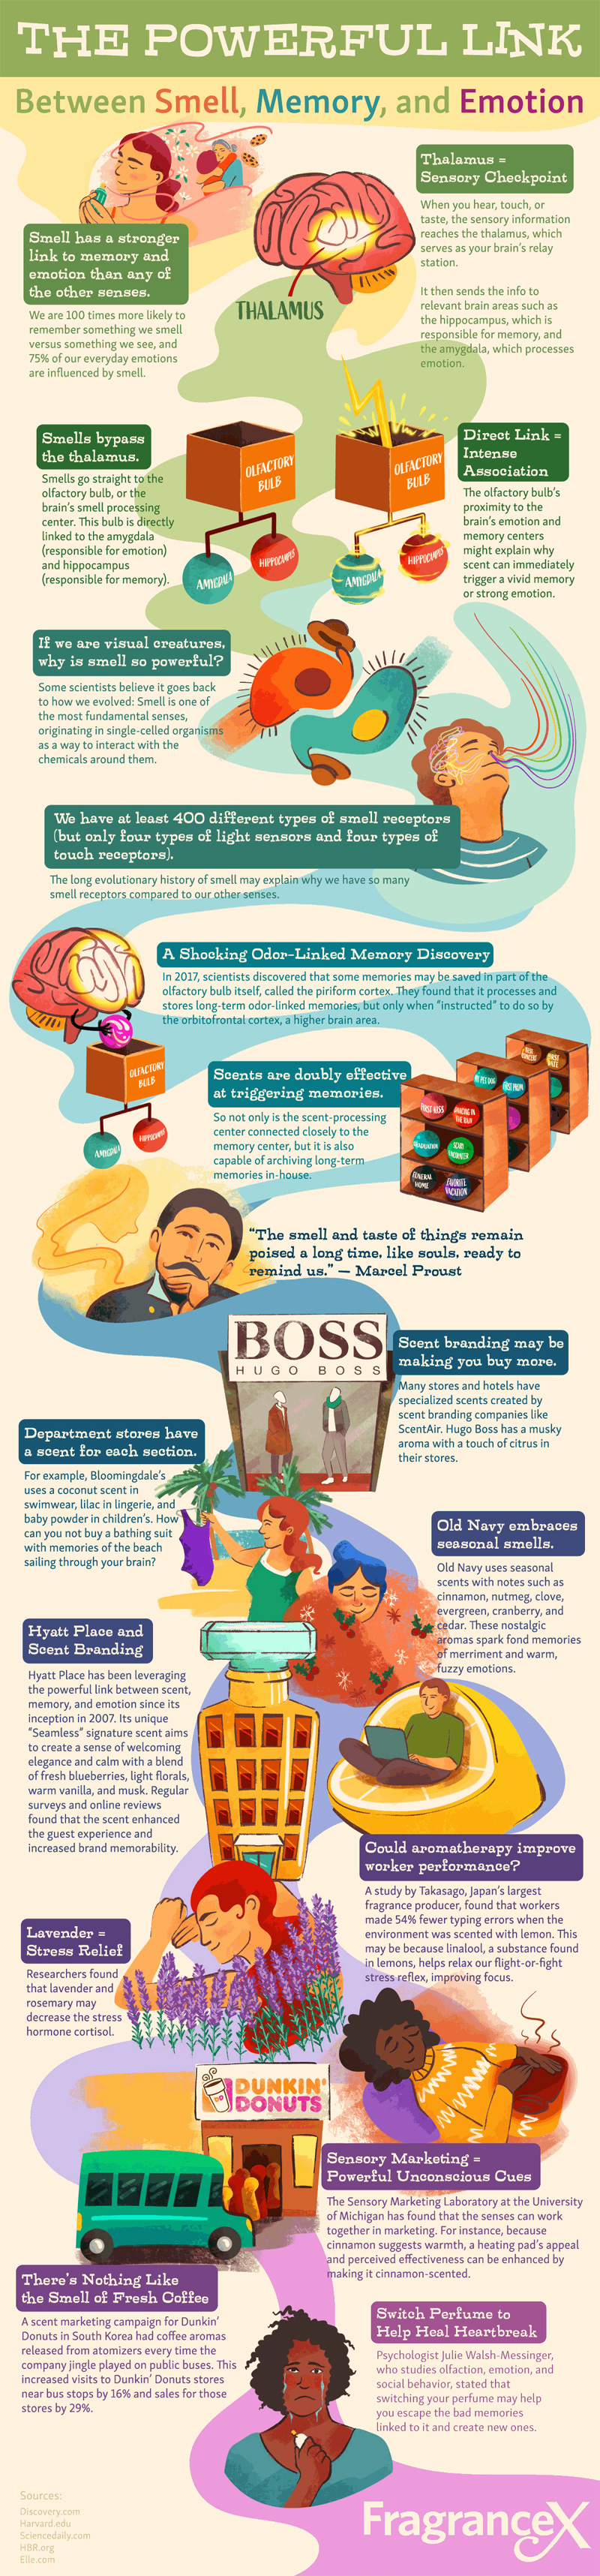 The Powerful Link Between Smell, Memory, and Emotion #infographic #best infographics #infographic s